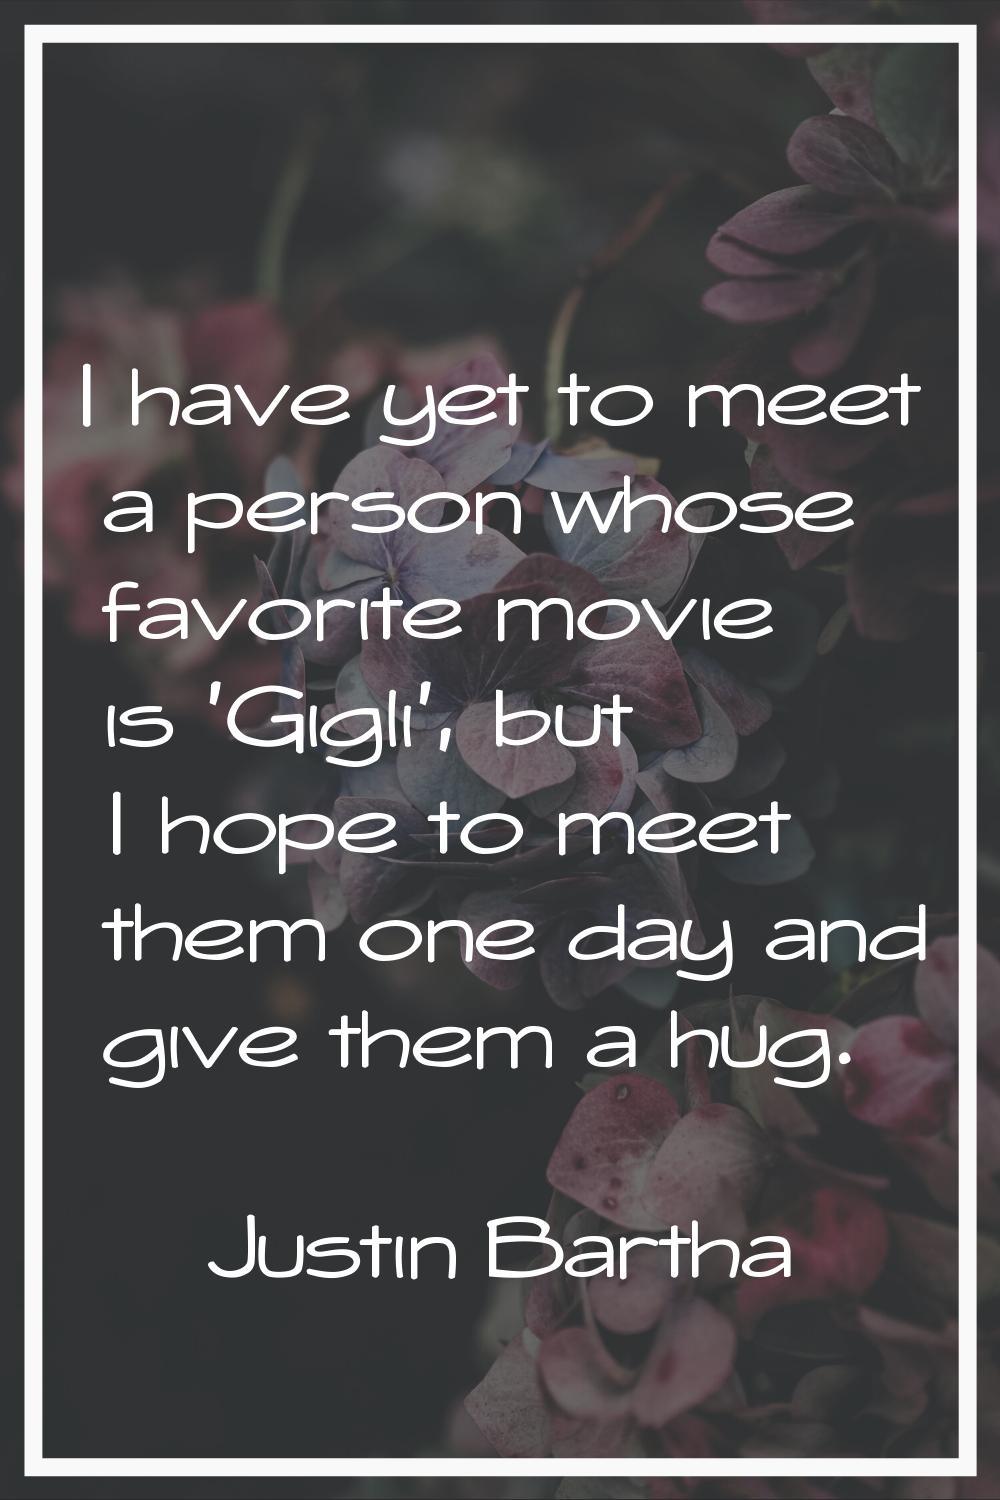 I have yet to meet a person whose favorite movie is 'Gigli', but I hope to meet them one day and gi